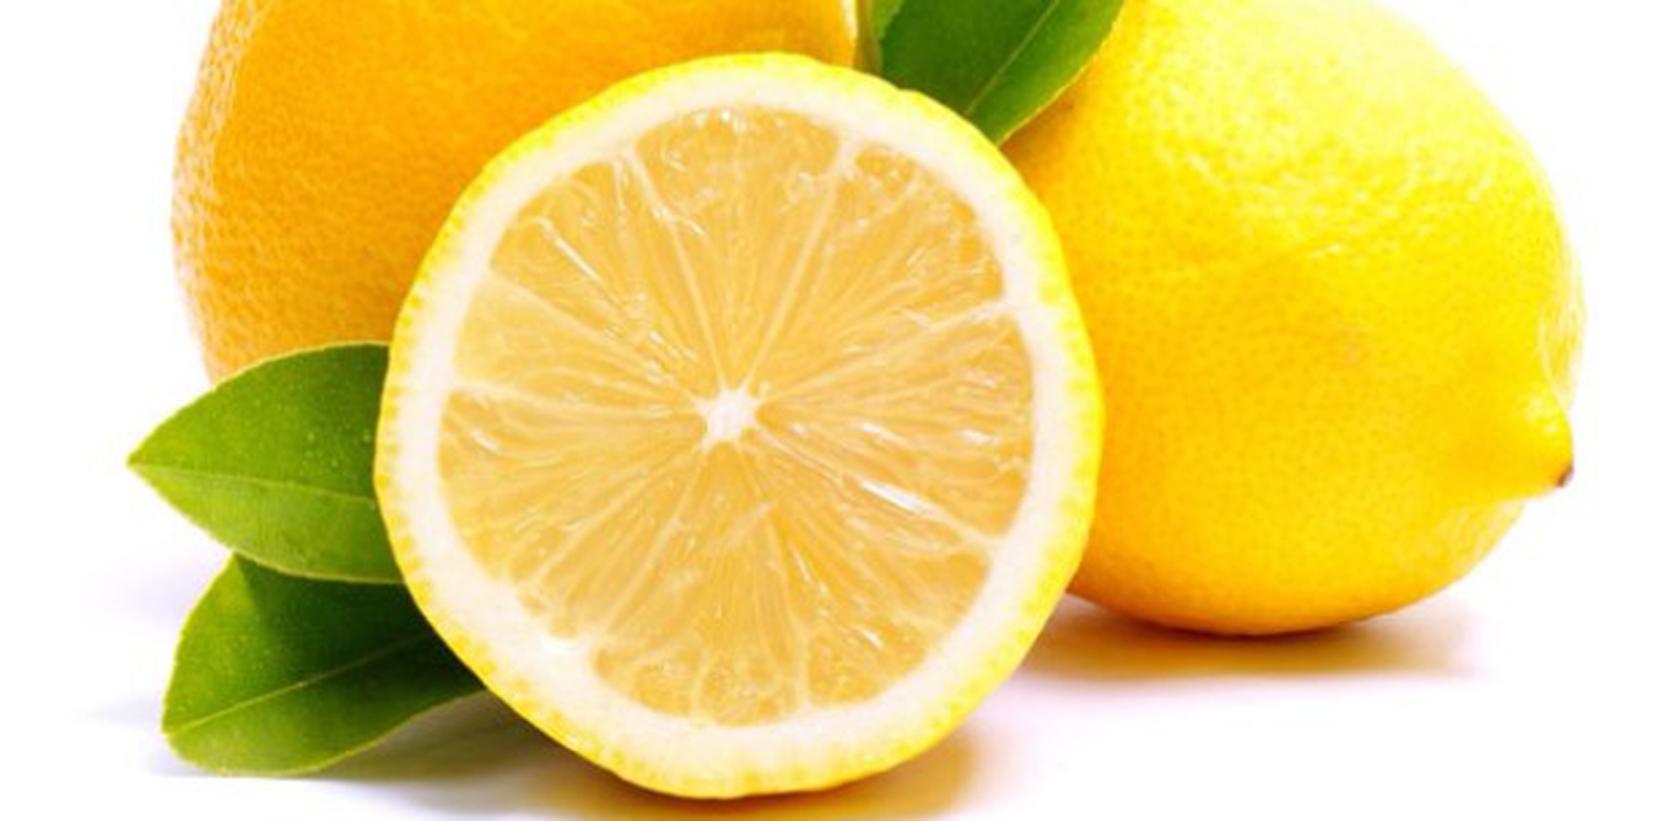 Myths and truths about the benefits of consuming water with lemon on an empty stomach